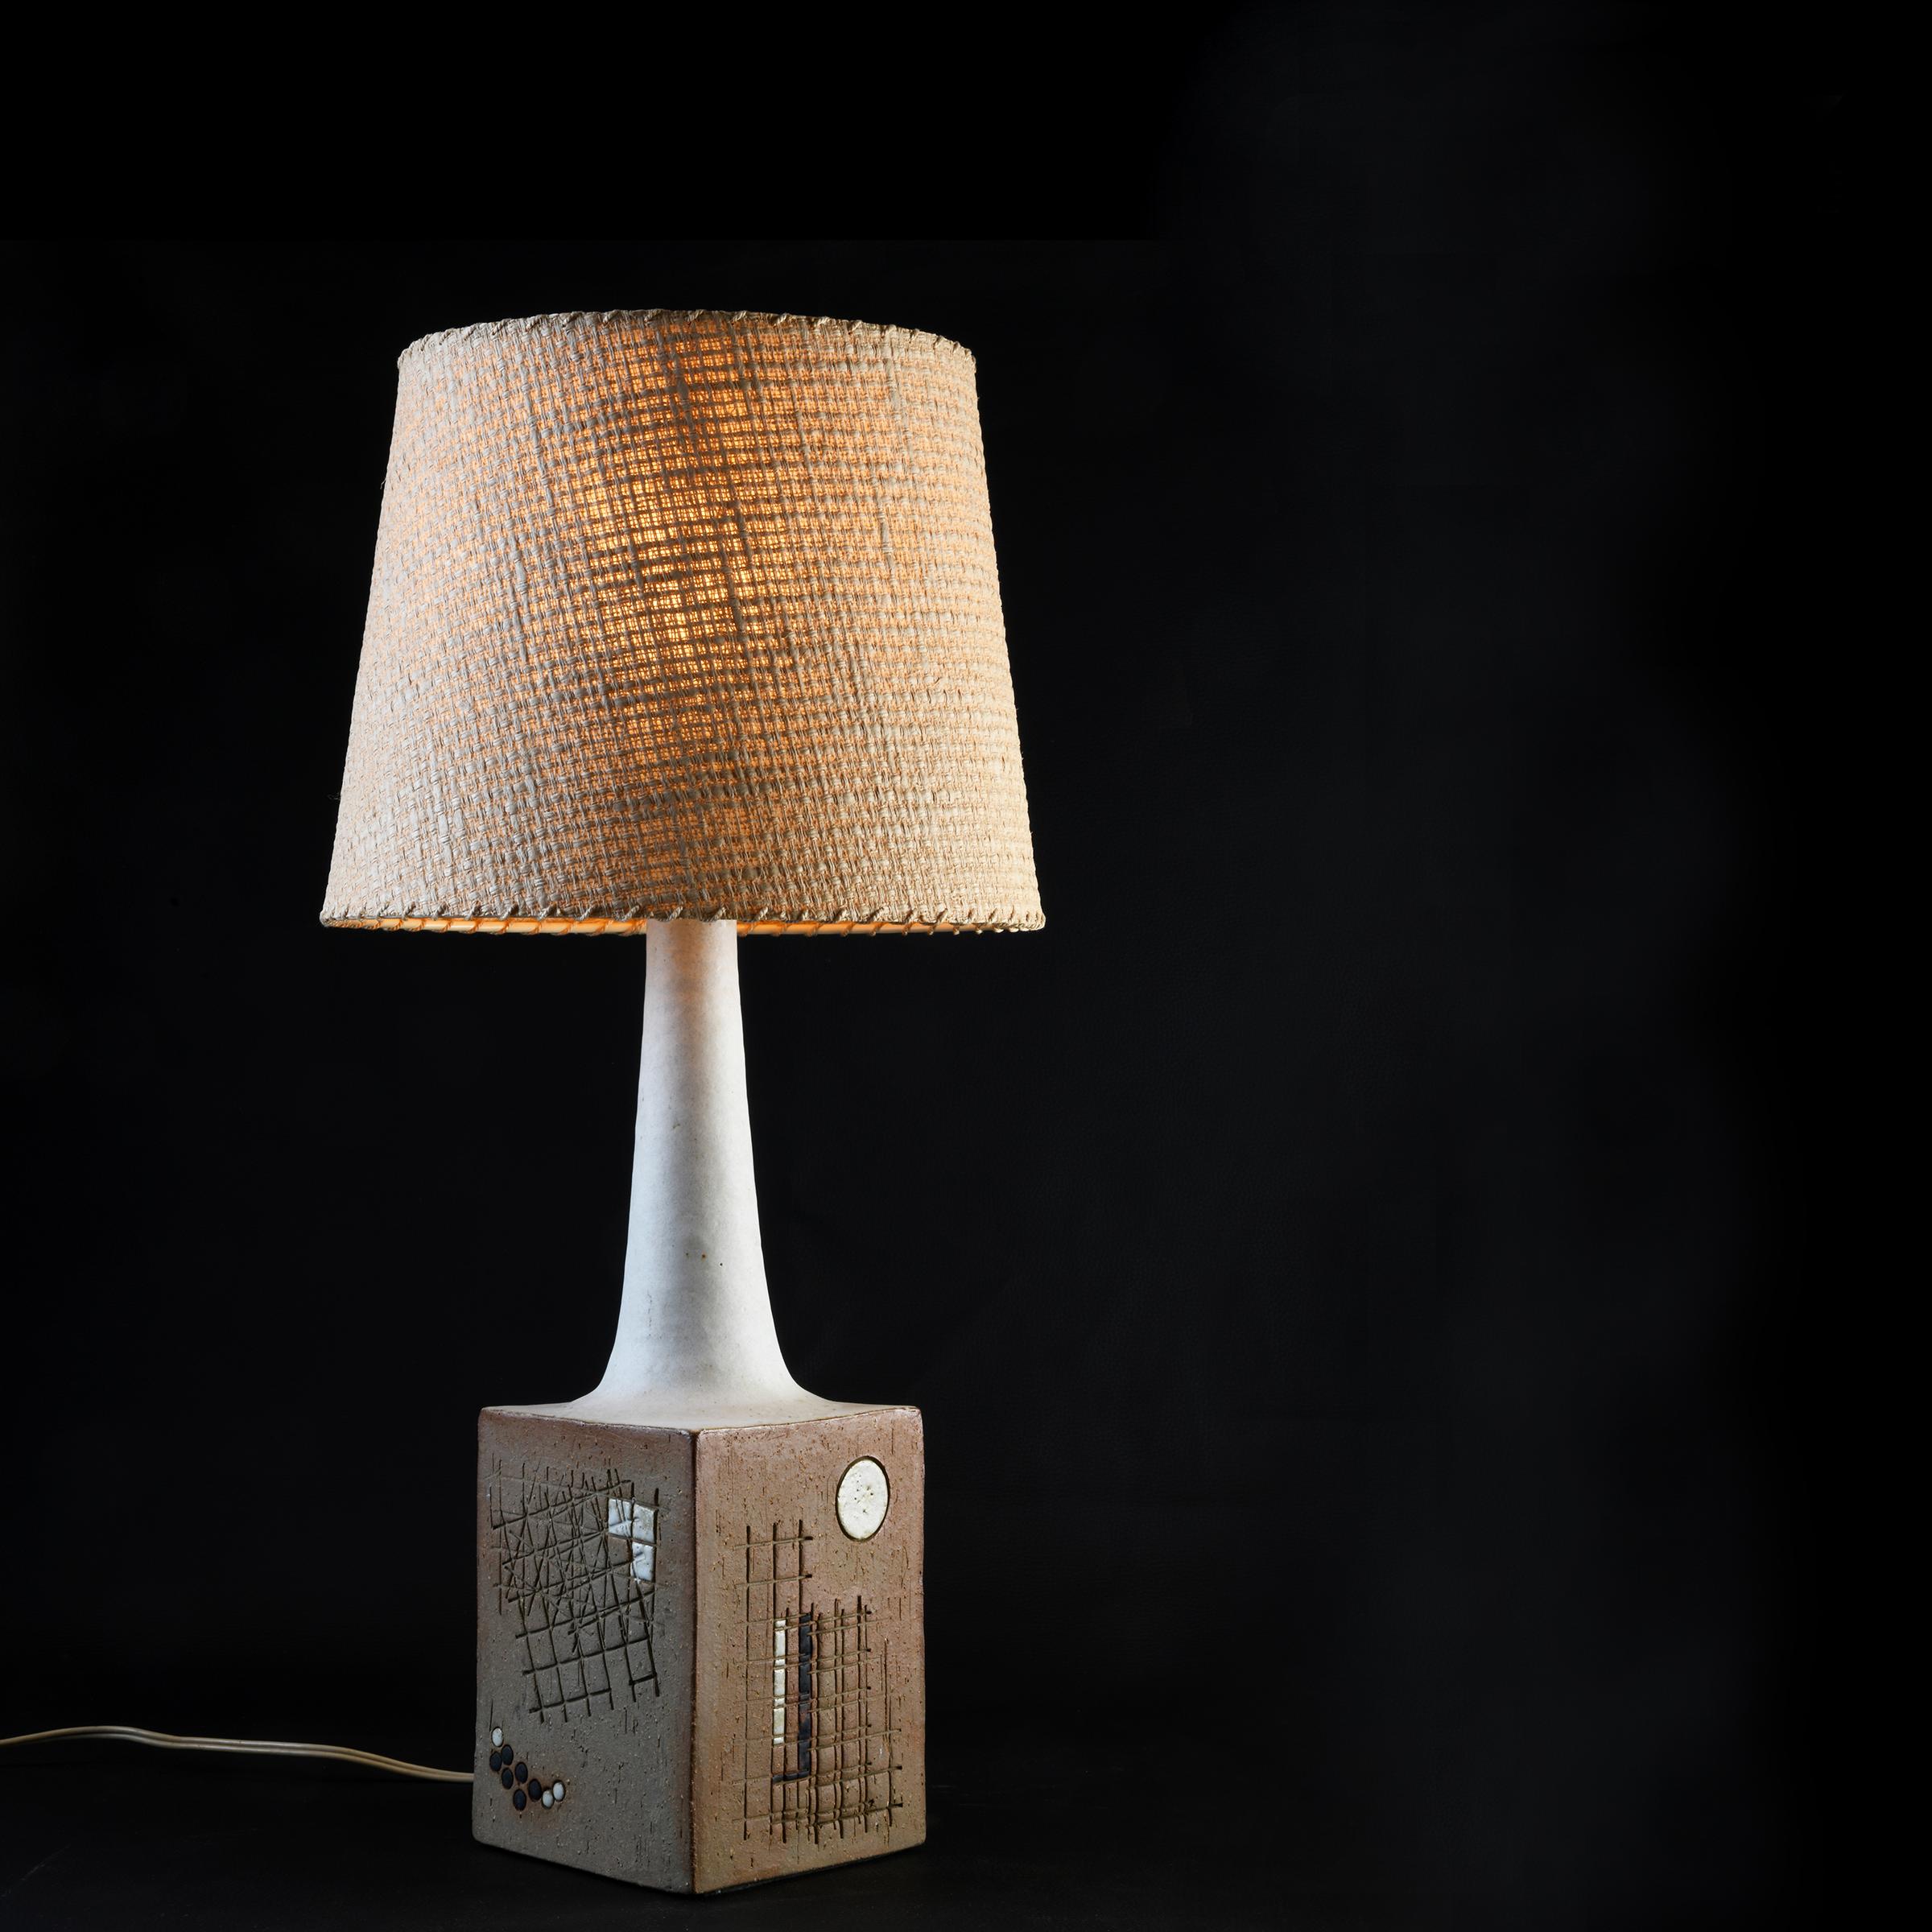 Ceramic table lamp by Mette Løkken Stiil and Alexa in the 1970s and a lampshade. The lampshade has an enamelled geometrical pattern on all four sides and a removable cover on the top, depending on the type of lighting required. Switch on the